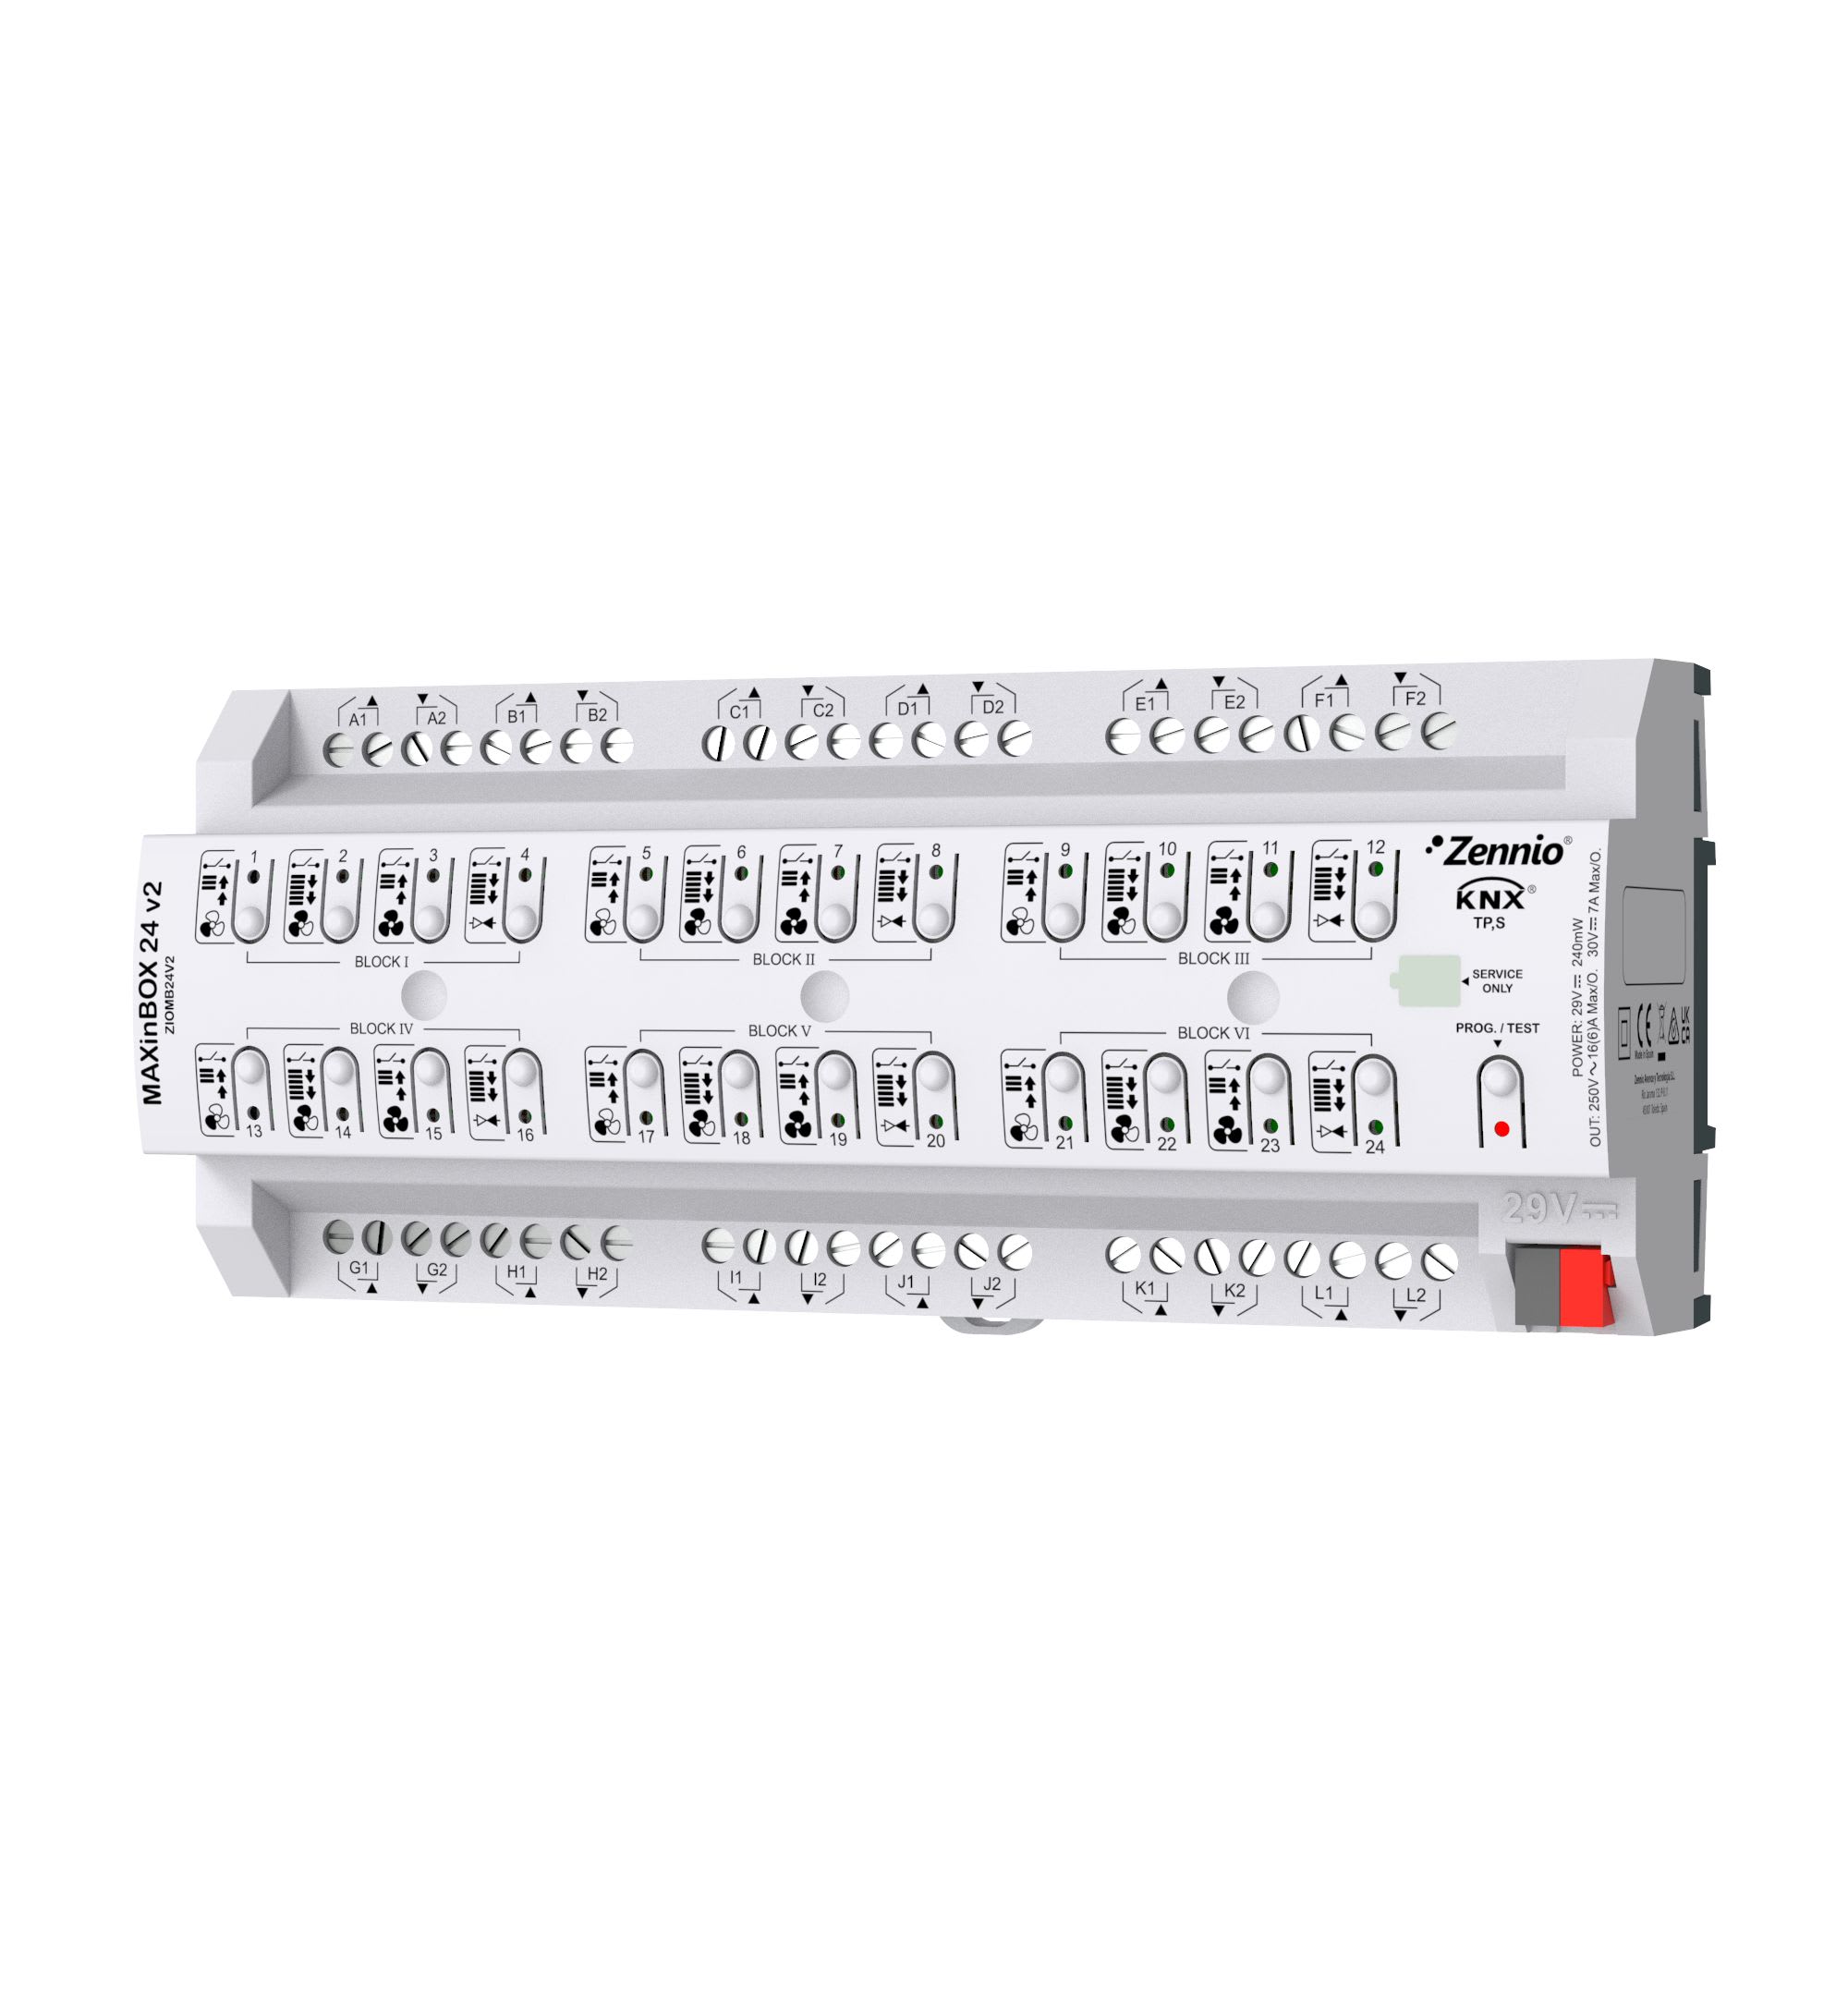 ZENNIO - MAXinBOX 24 v2. Actionneur multifonction KNX - 24 sorties 16A